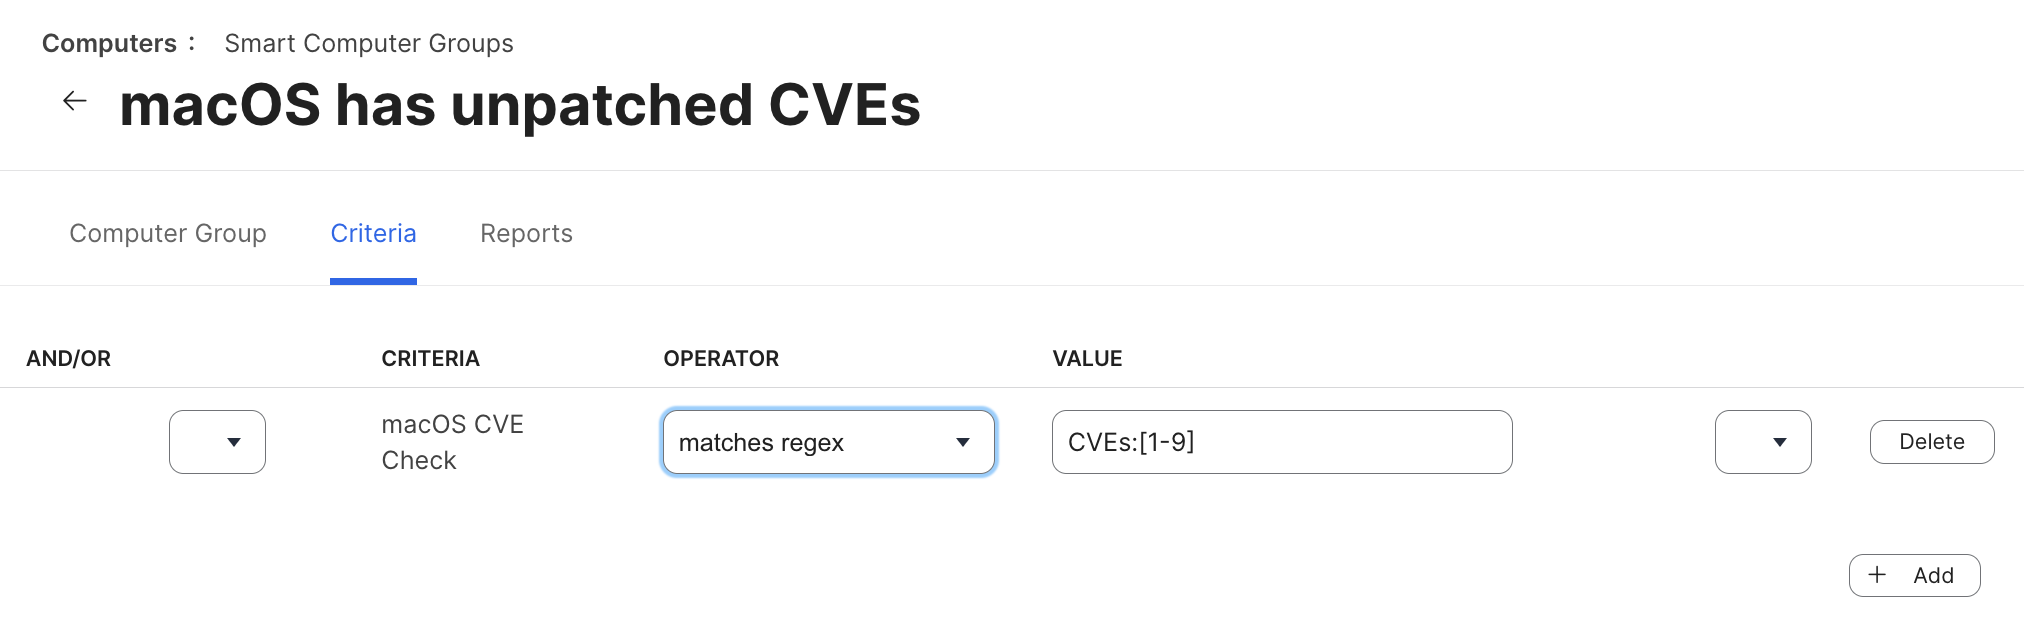 macOS has unpatched CVEs